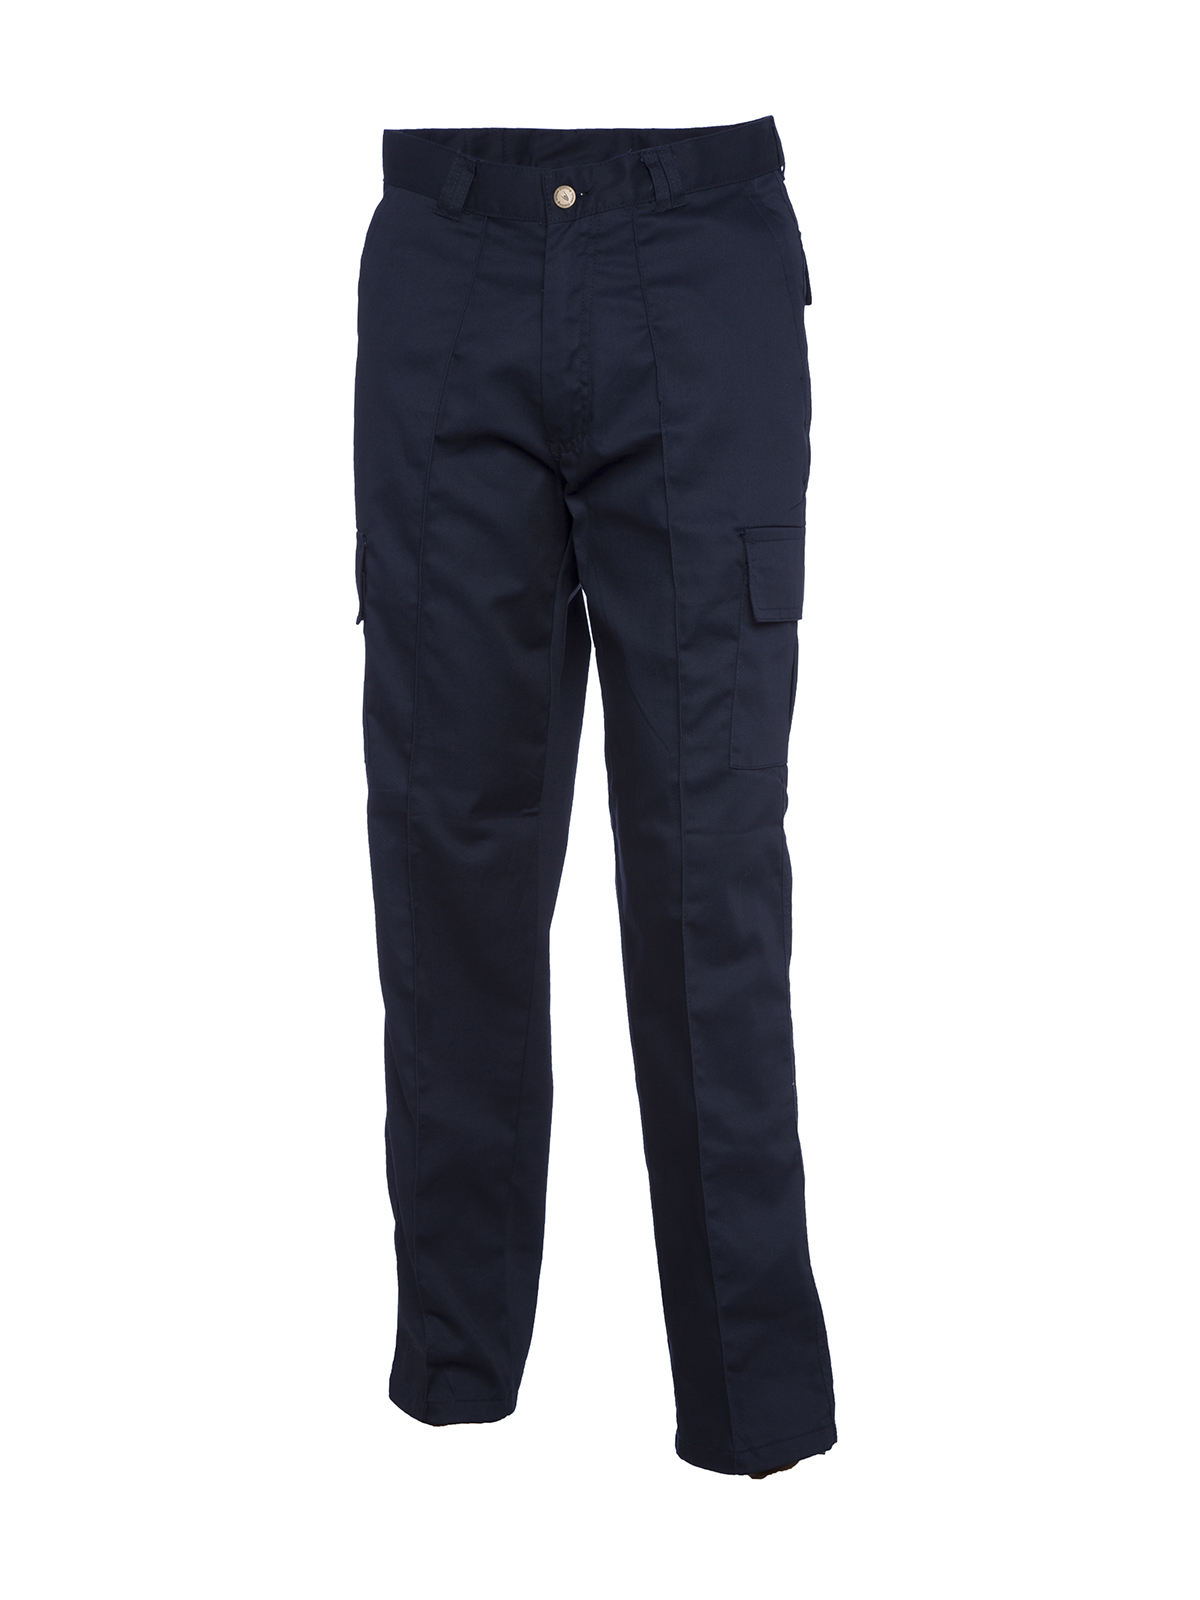 Cargo Trousers, Navy Blue - 38S